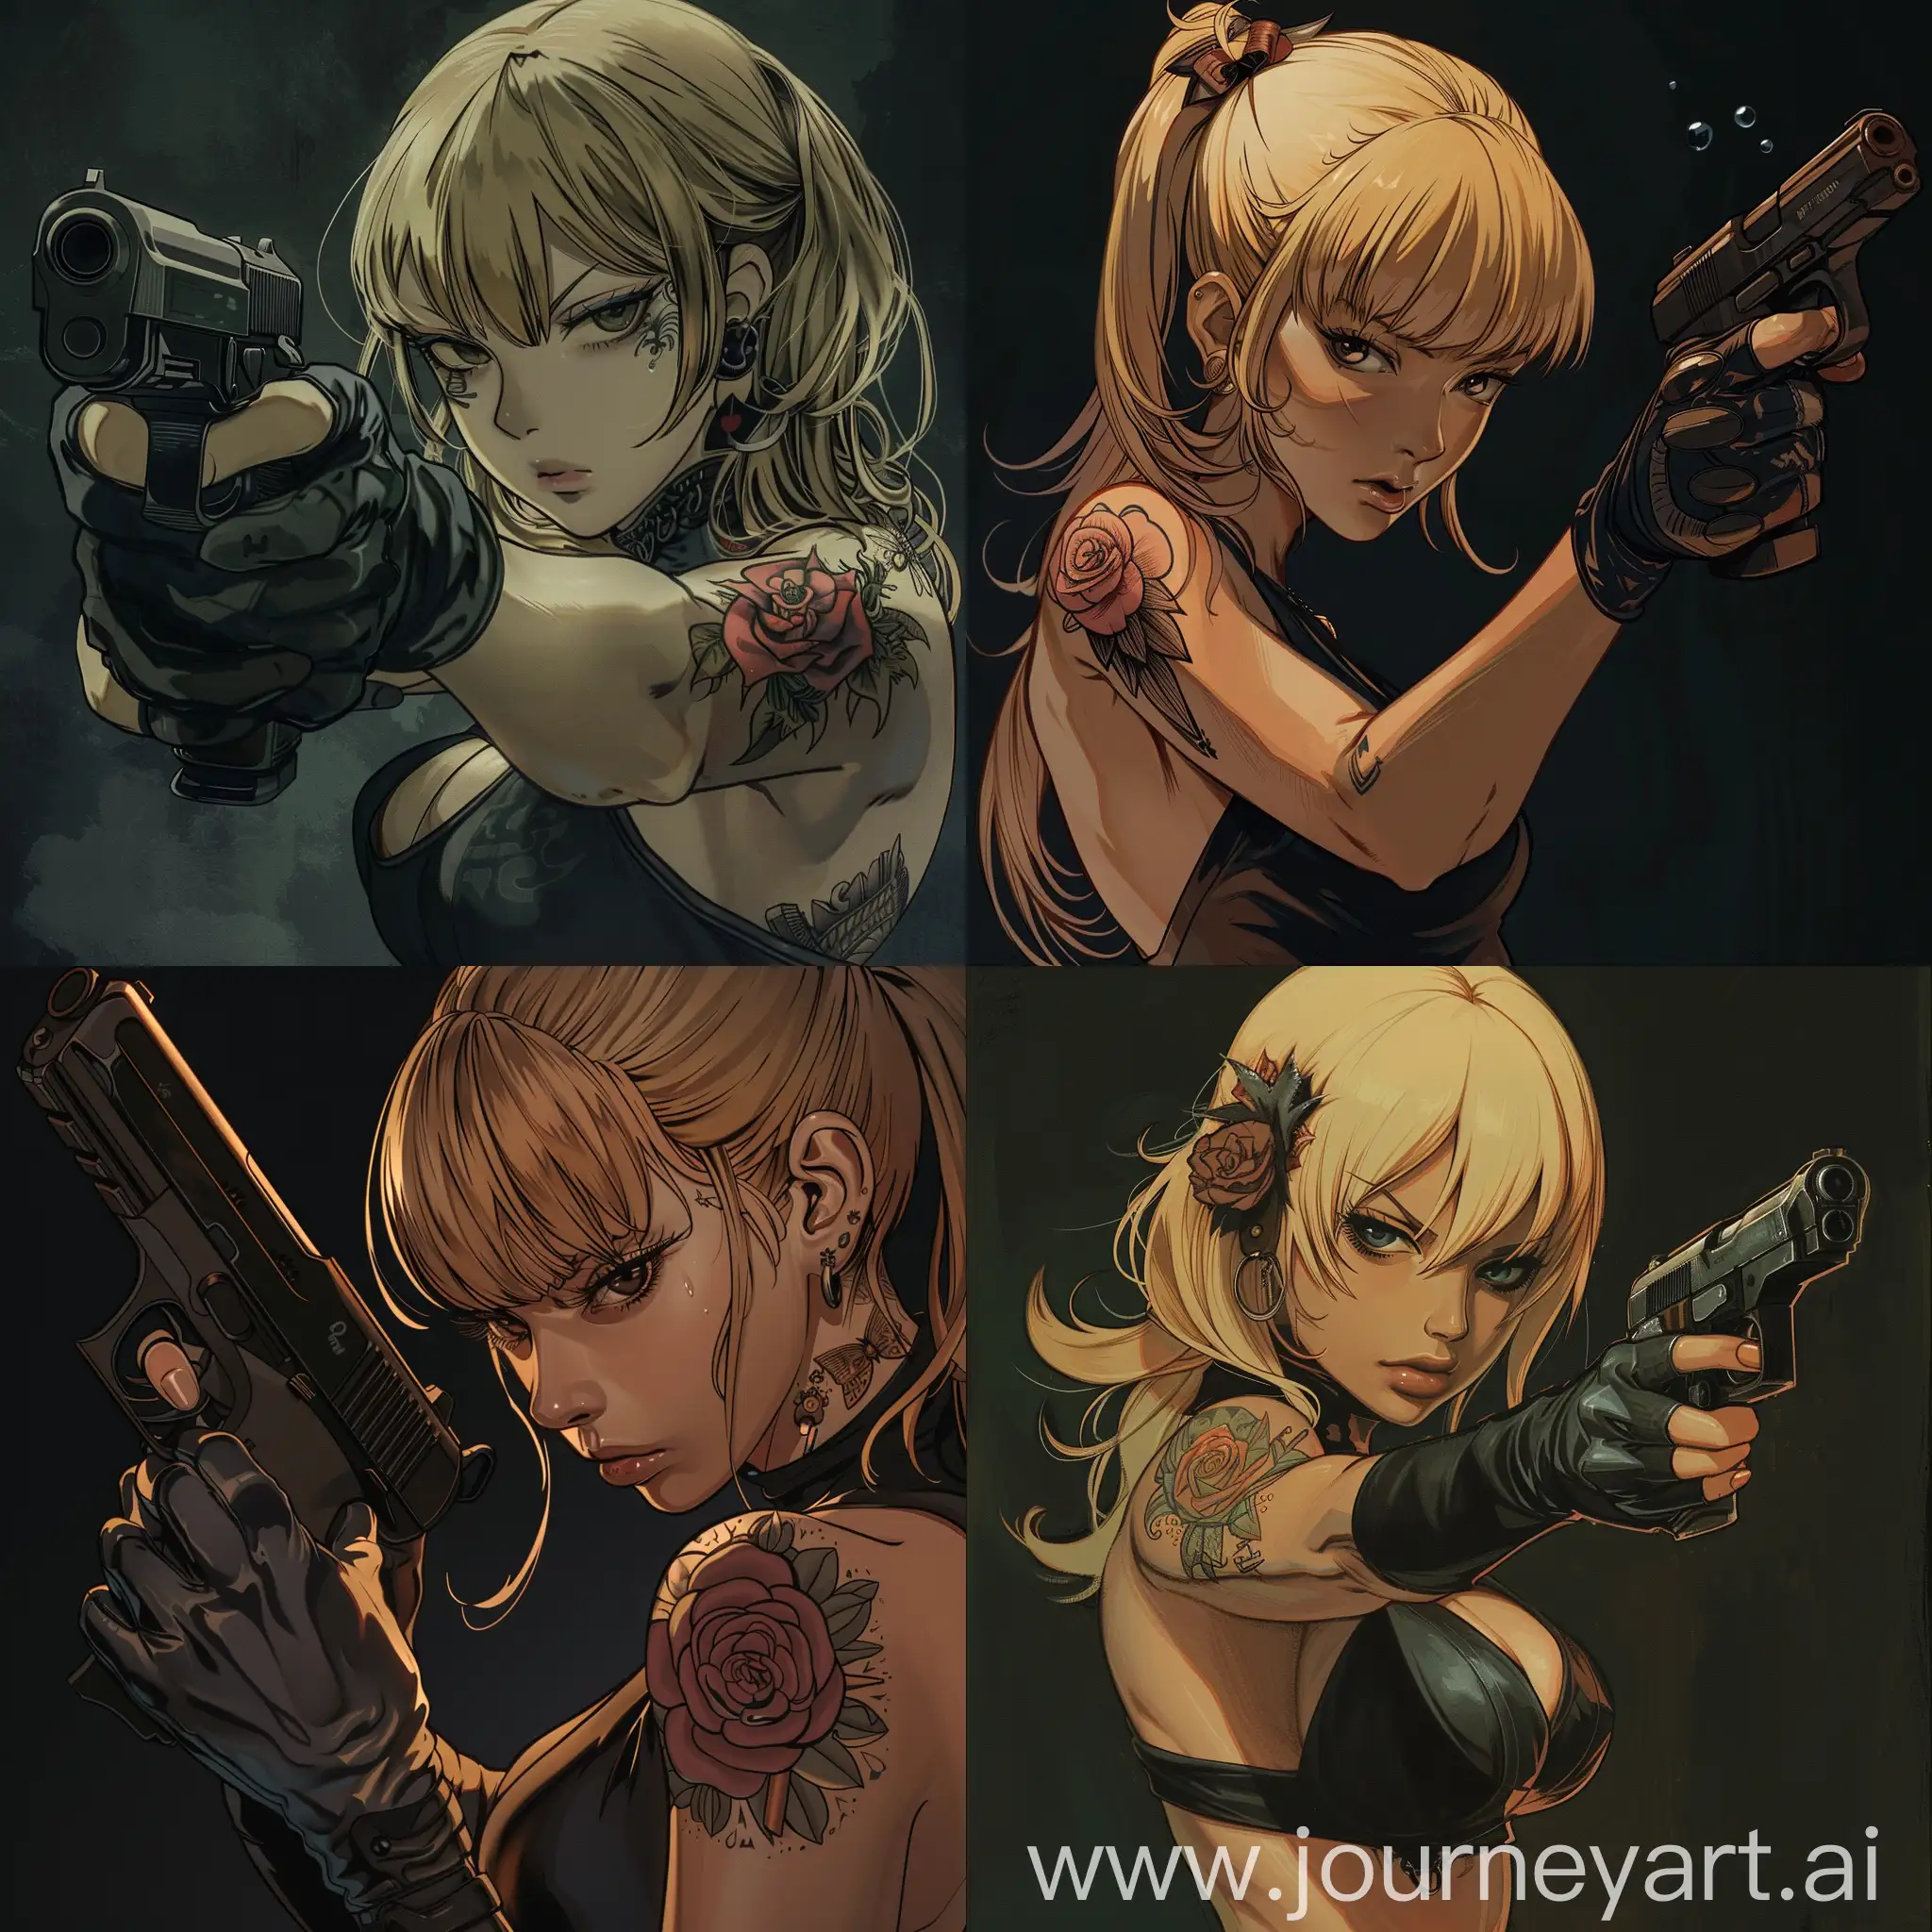 Girl, Retro Anime, Blonde, Black lagoon, 2000s anime style, wearing gloves, she holds the gun with one hand, gun barrel is pointing downwards, tattoo on the shoulder, dark tones, 